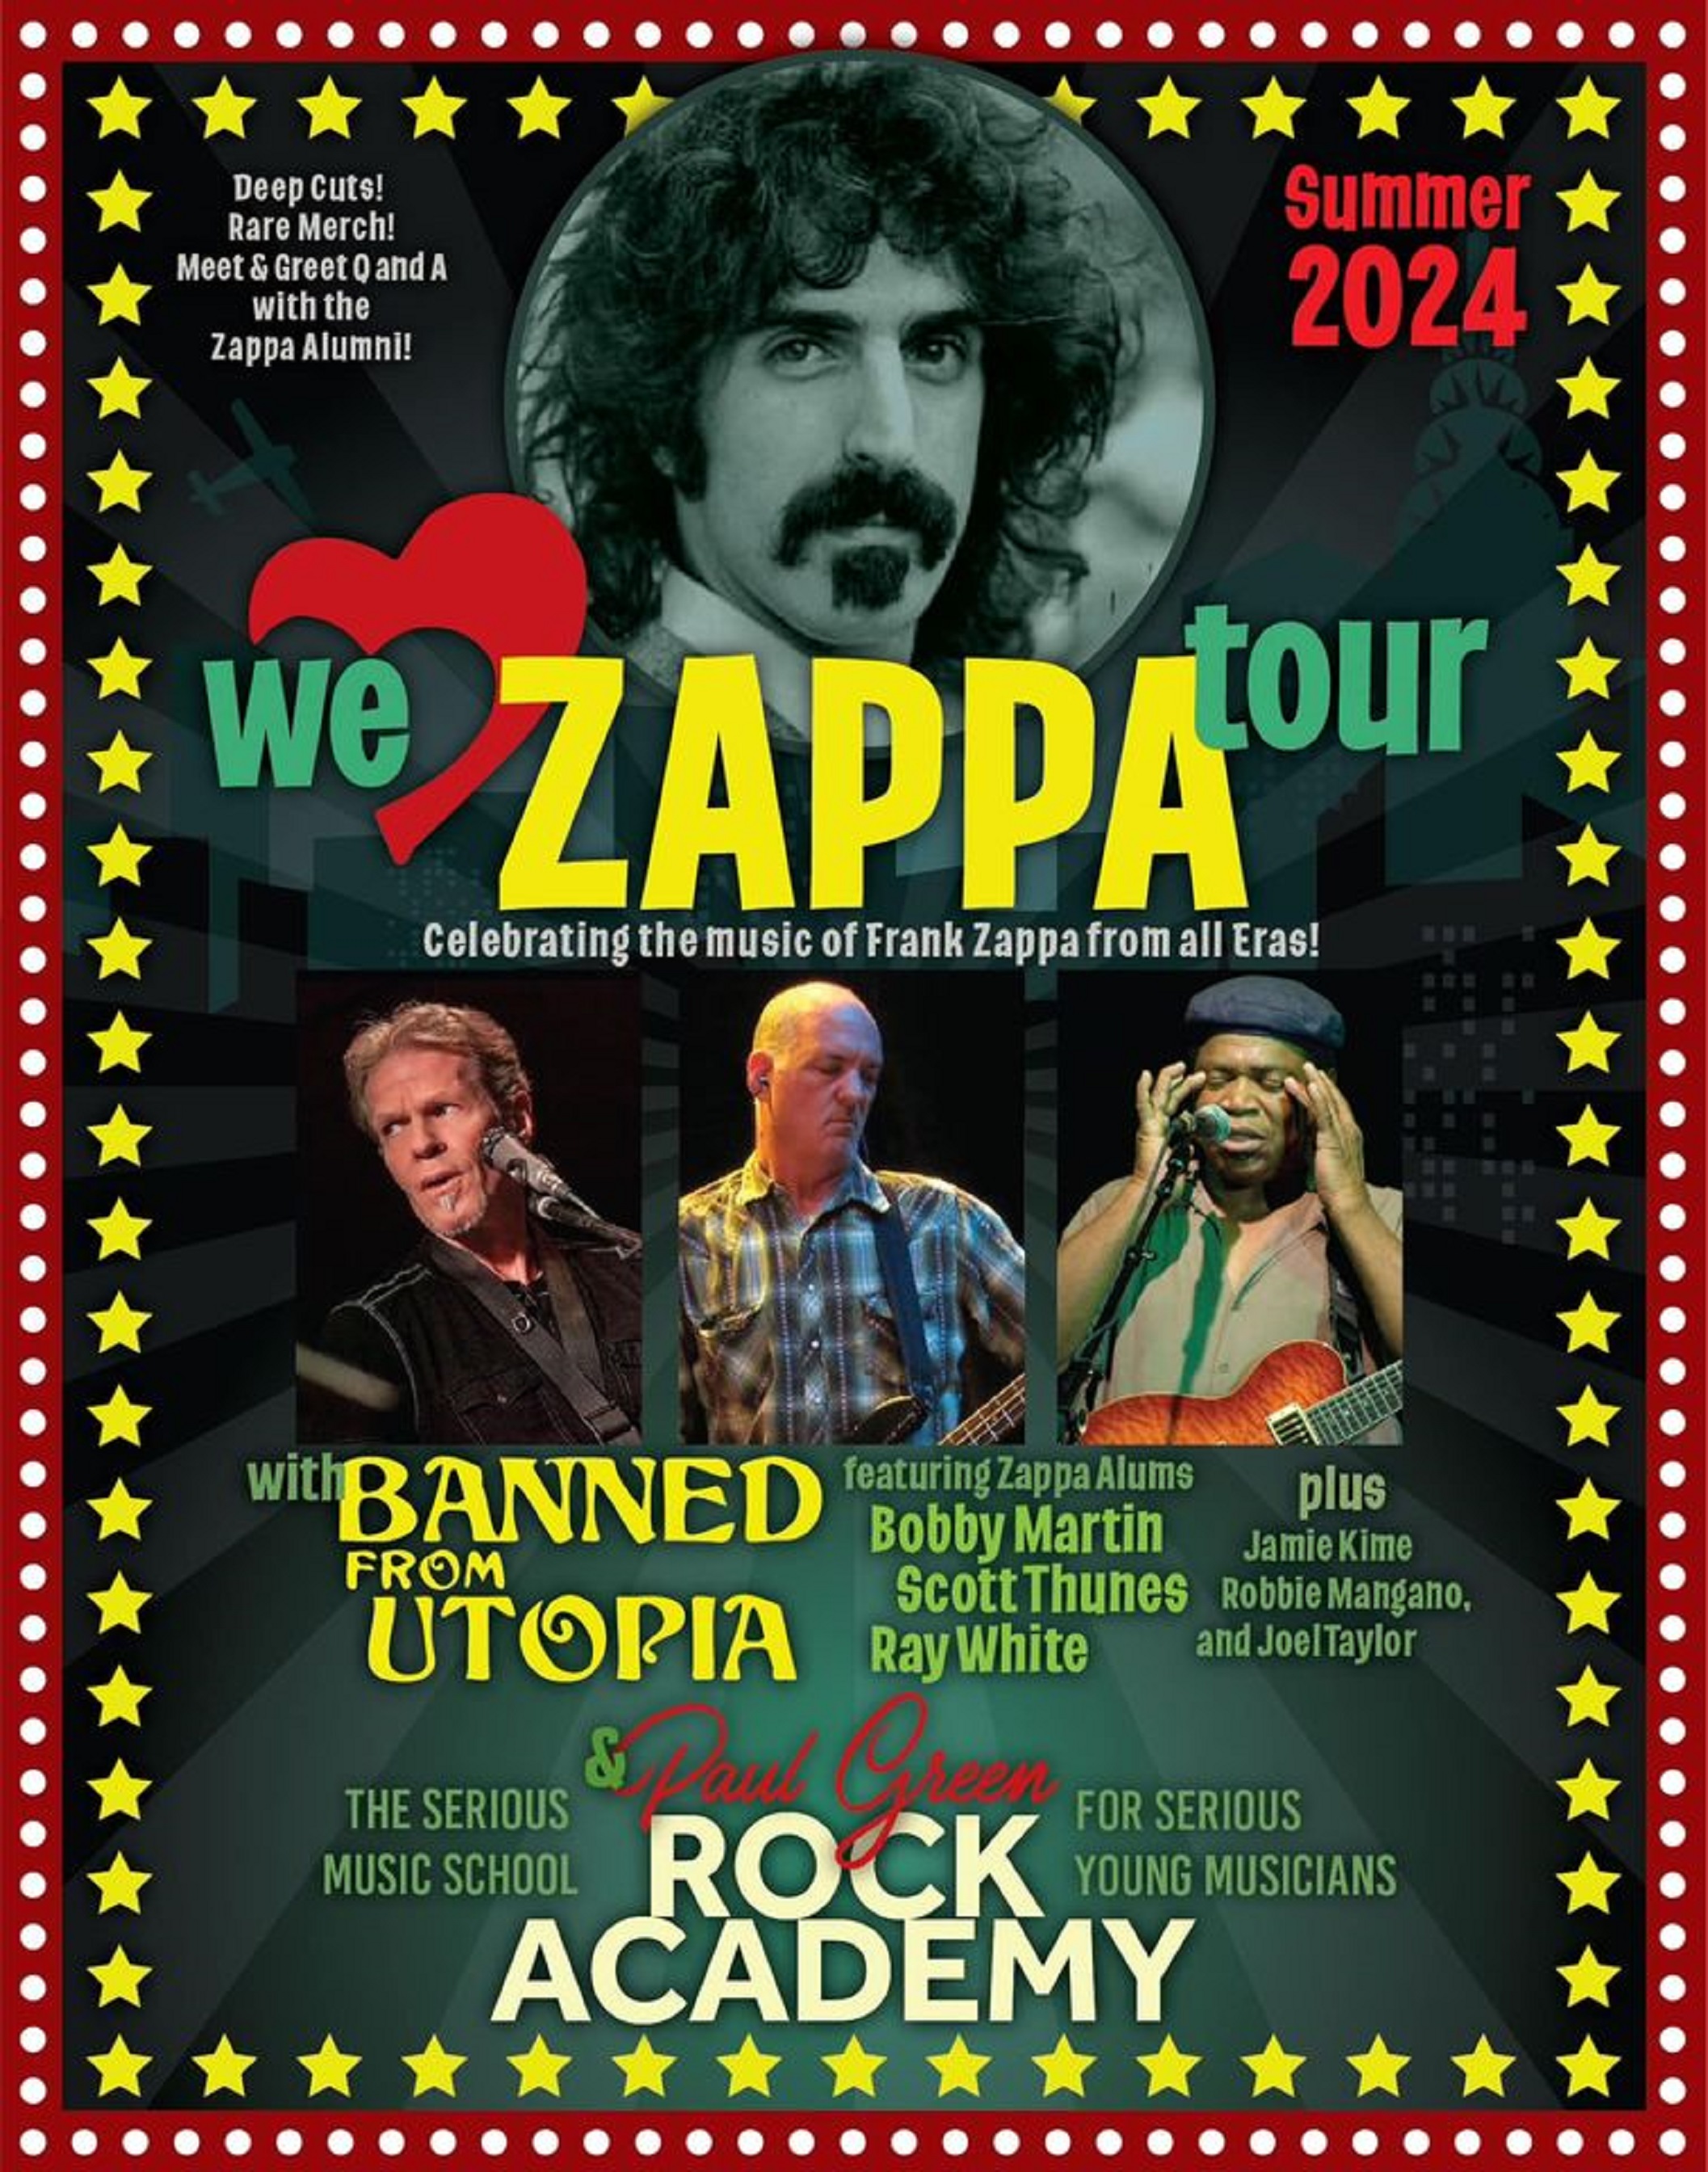 Banned From Utopia Featuring Frank Zappa Alumni To Tour With The Paul Green Rock Academy Summer 2024!